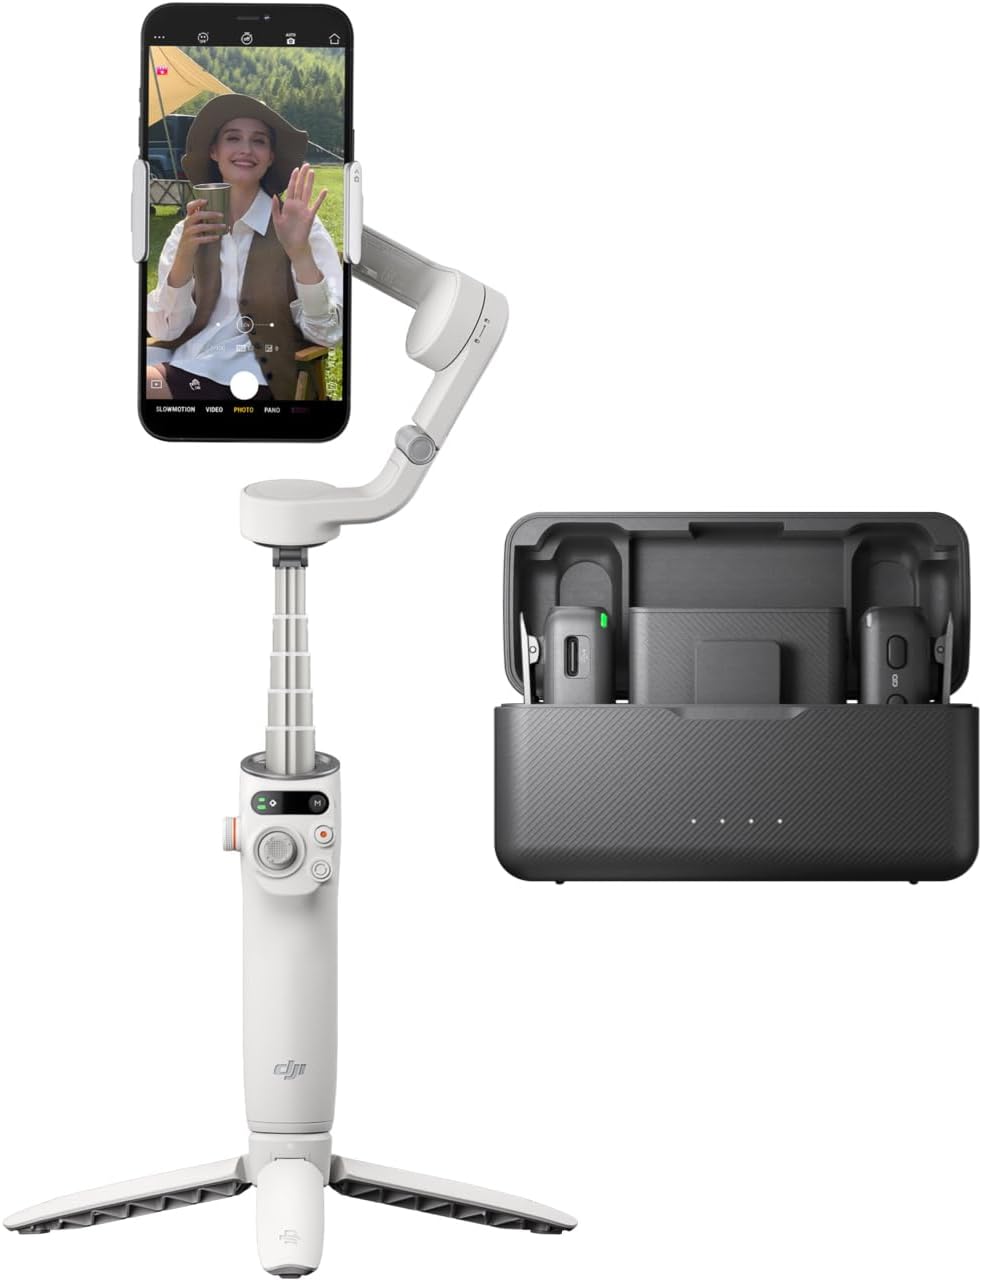 DJI Osmo Mobile 6 Gimbal Stabilizer for Smartphones, 3-Axis Phone Gimbal, Built-In Extension Rod, Object Tracking, Portable and Foldable, Vlogging Stabilizer, YouTube TikTok, Slate Gray